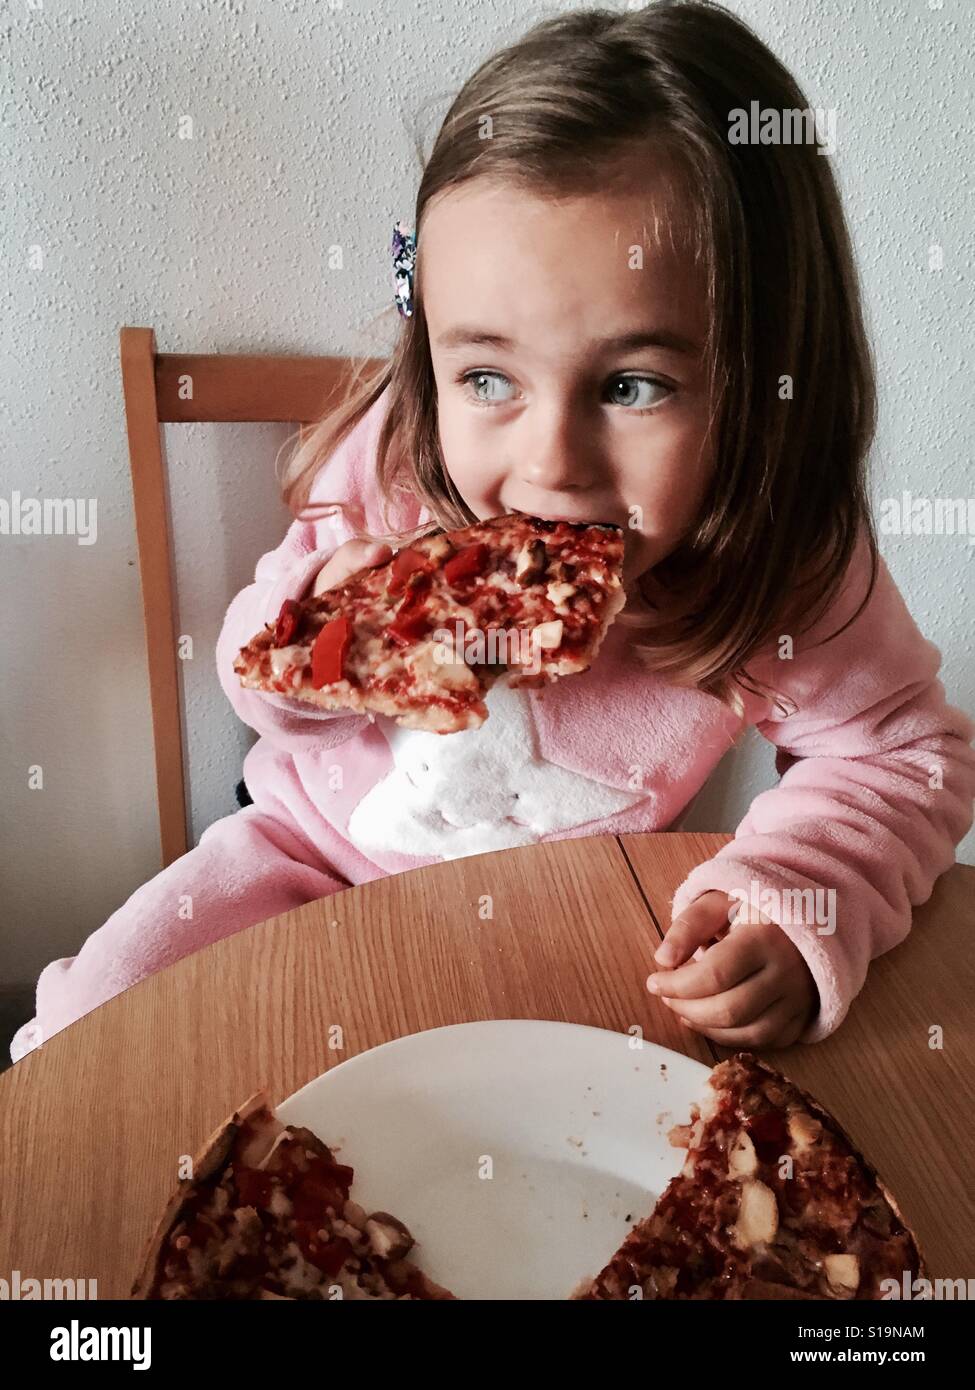 Little girl eating a pizza Stock Photo